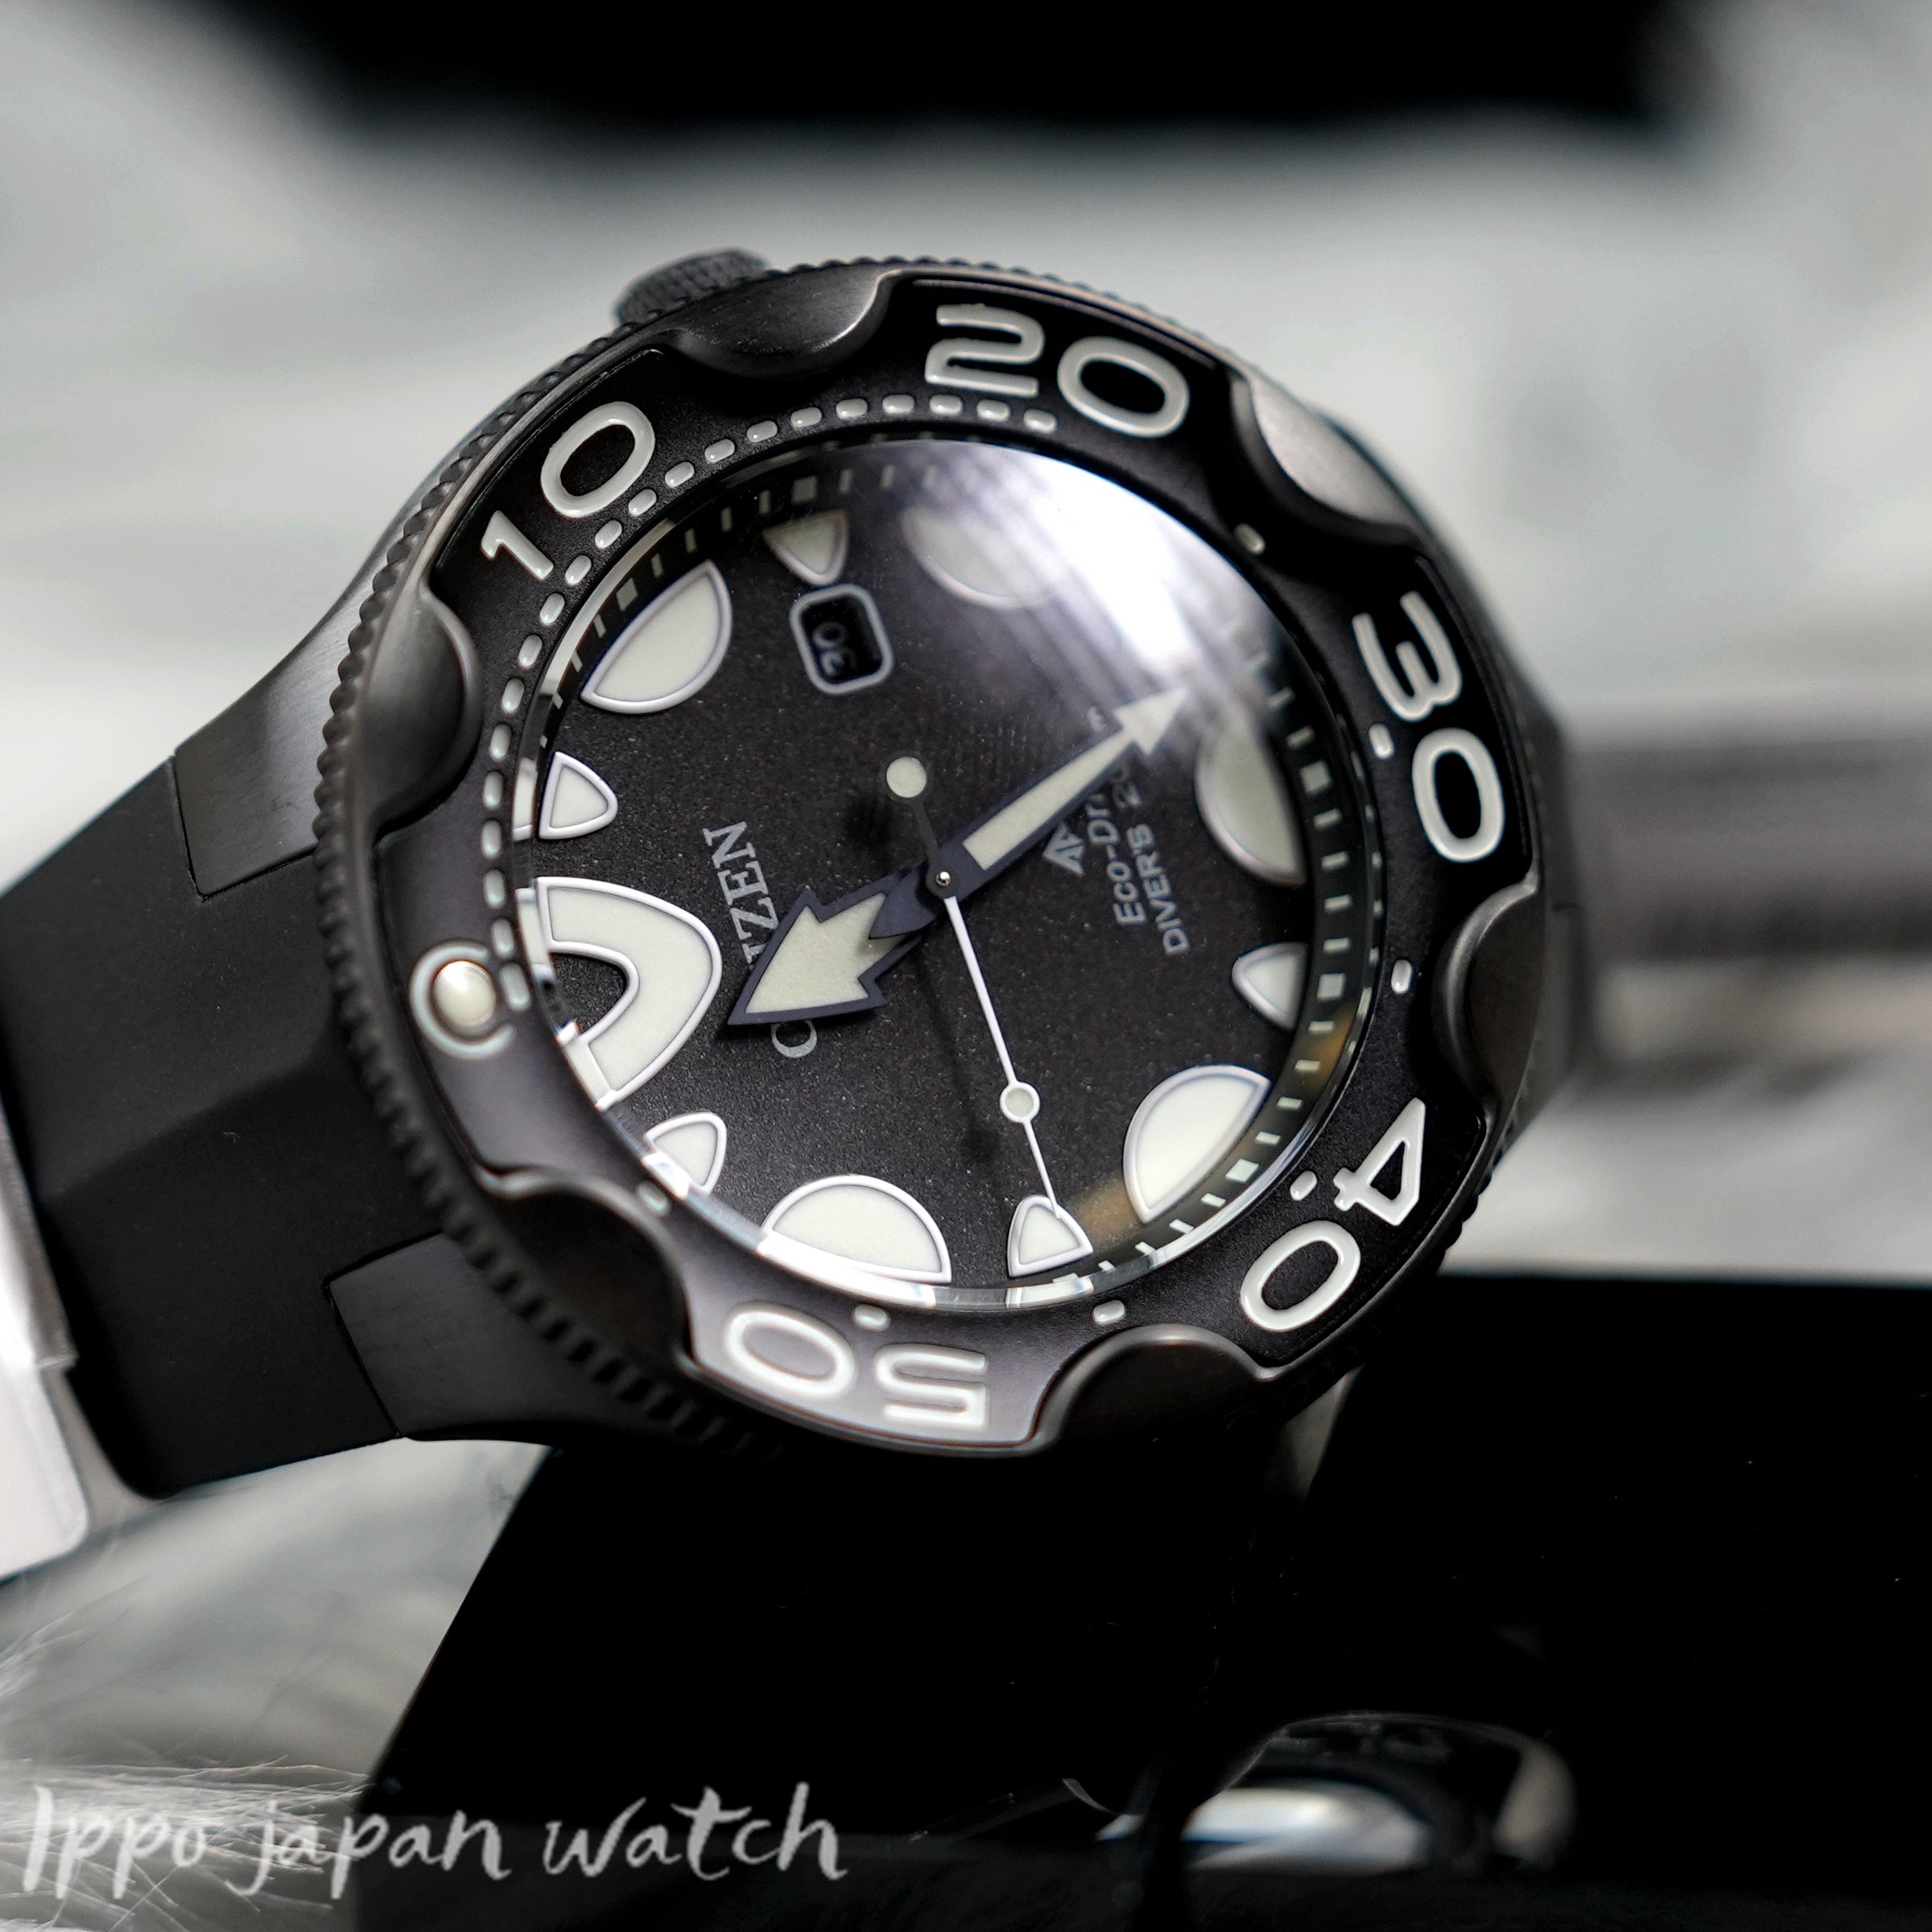 watch – photovoltaic stainless IPPO eco-drive promaster BN0235-01E 20 WATCH Citizen JAPAN